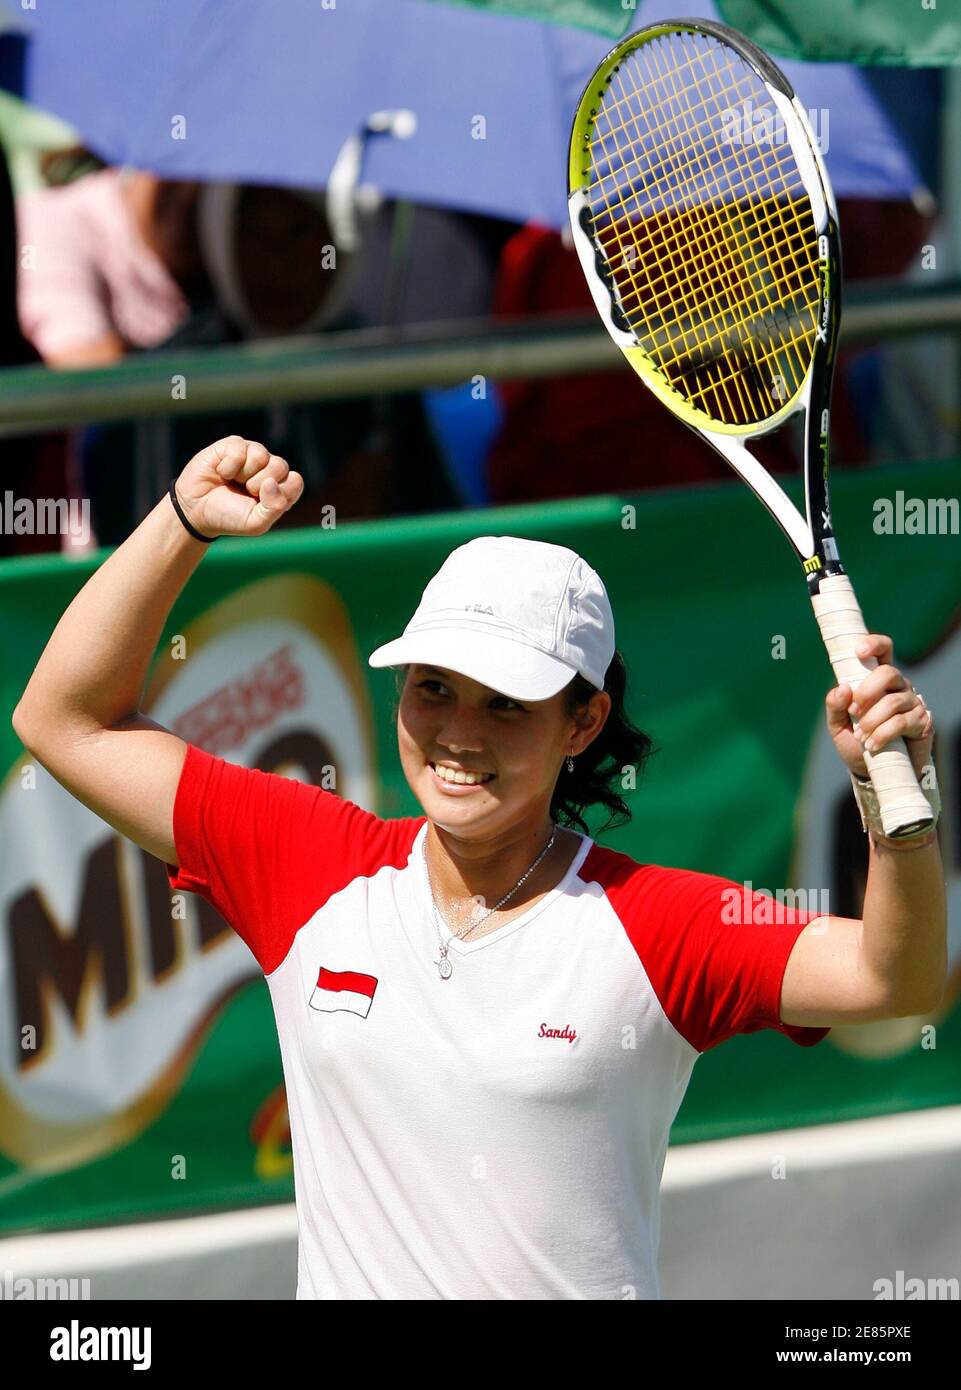 Indonesia'a Sandy Gumulya cerebrates after defeating Thailand's Nudnida  Luangnam during the tennis women's singles final match at the SEA Games in  Nakhon Ratchasima December 14, 2007. Sandy won to take the gold.